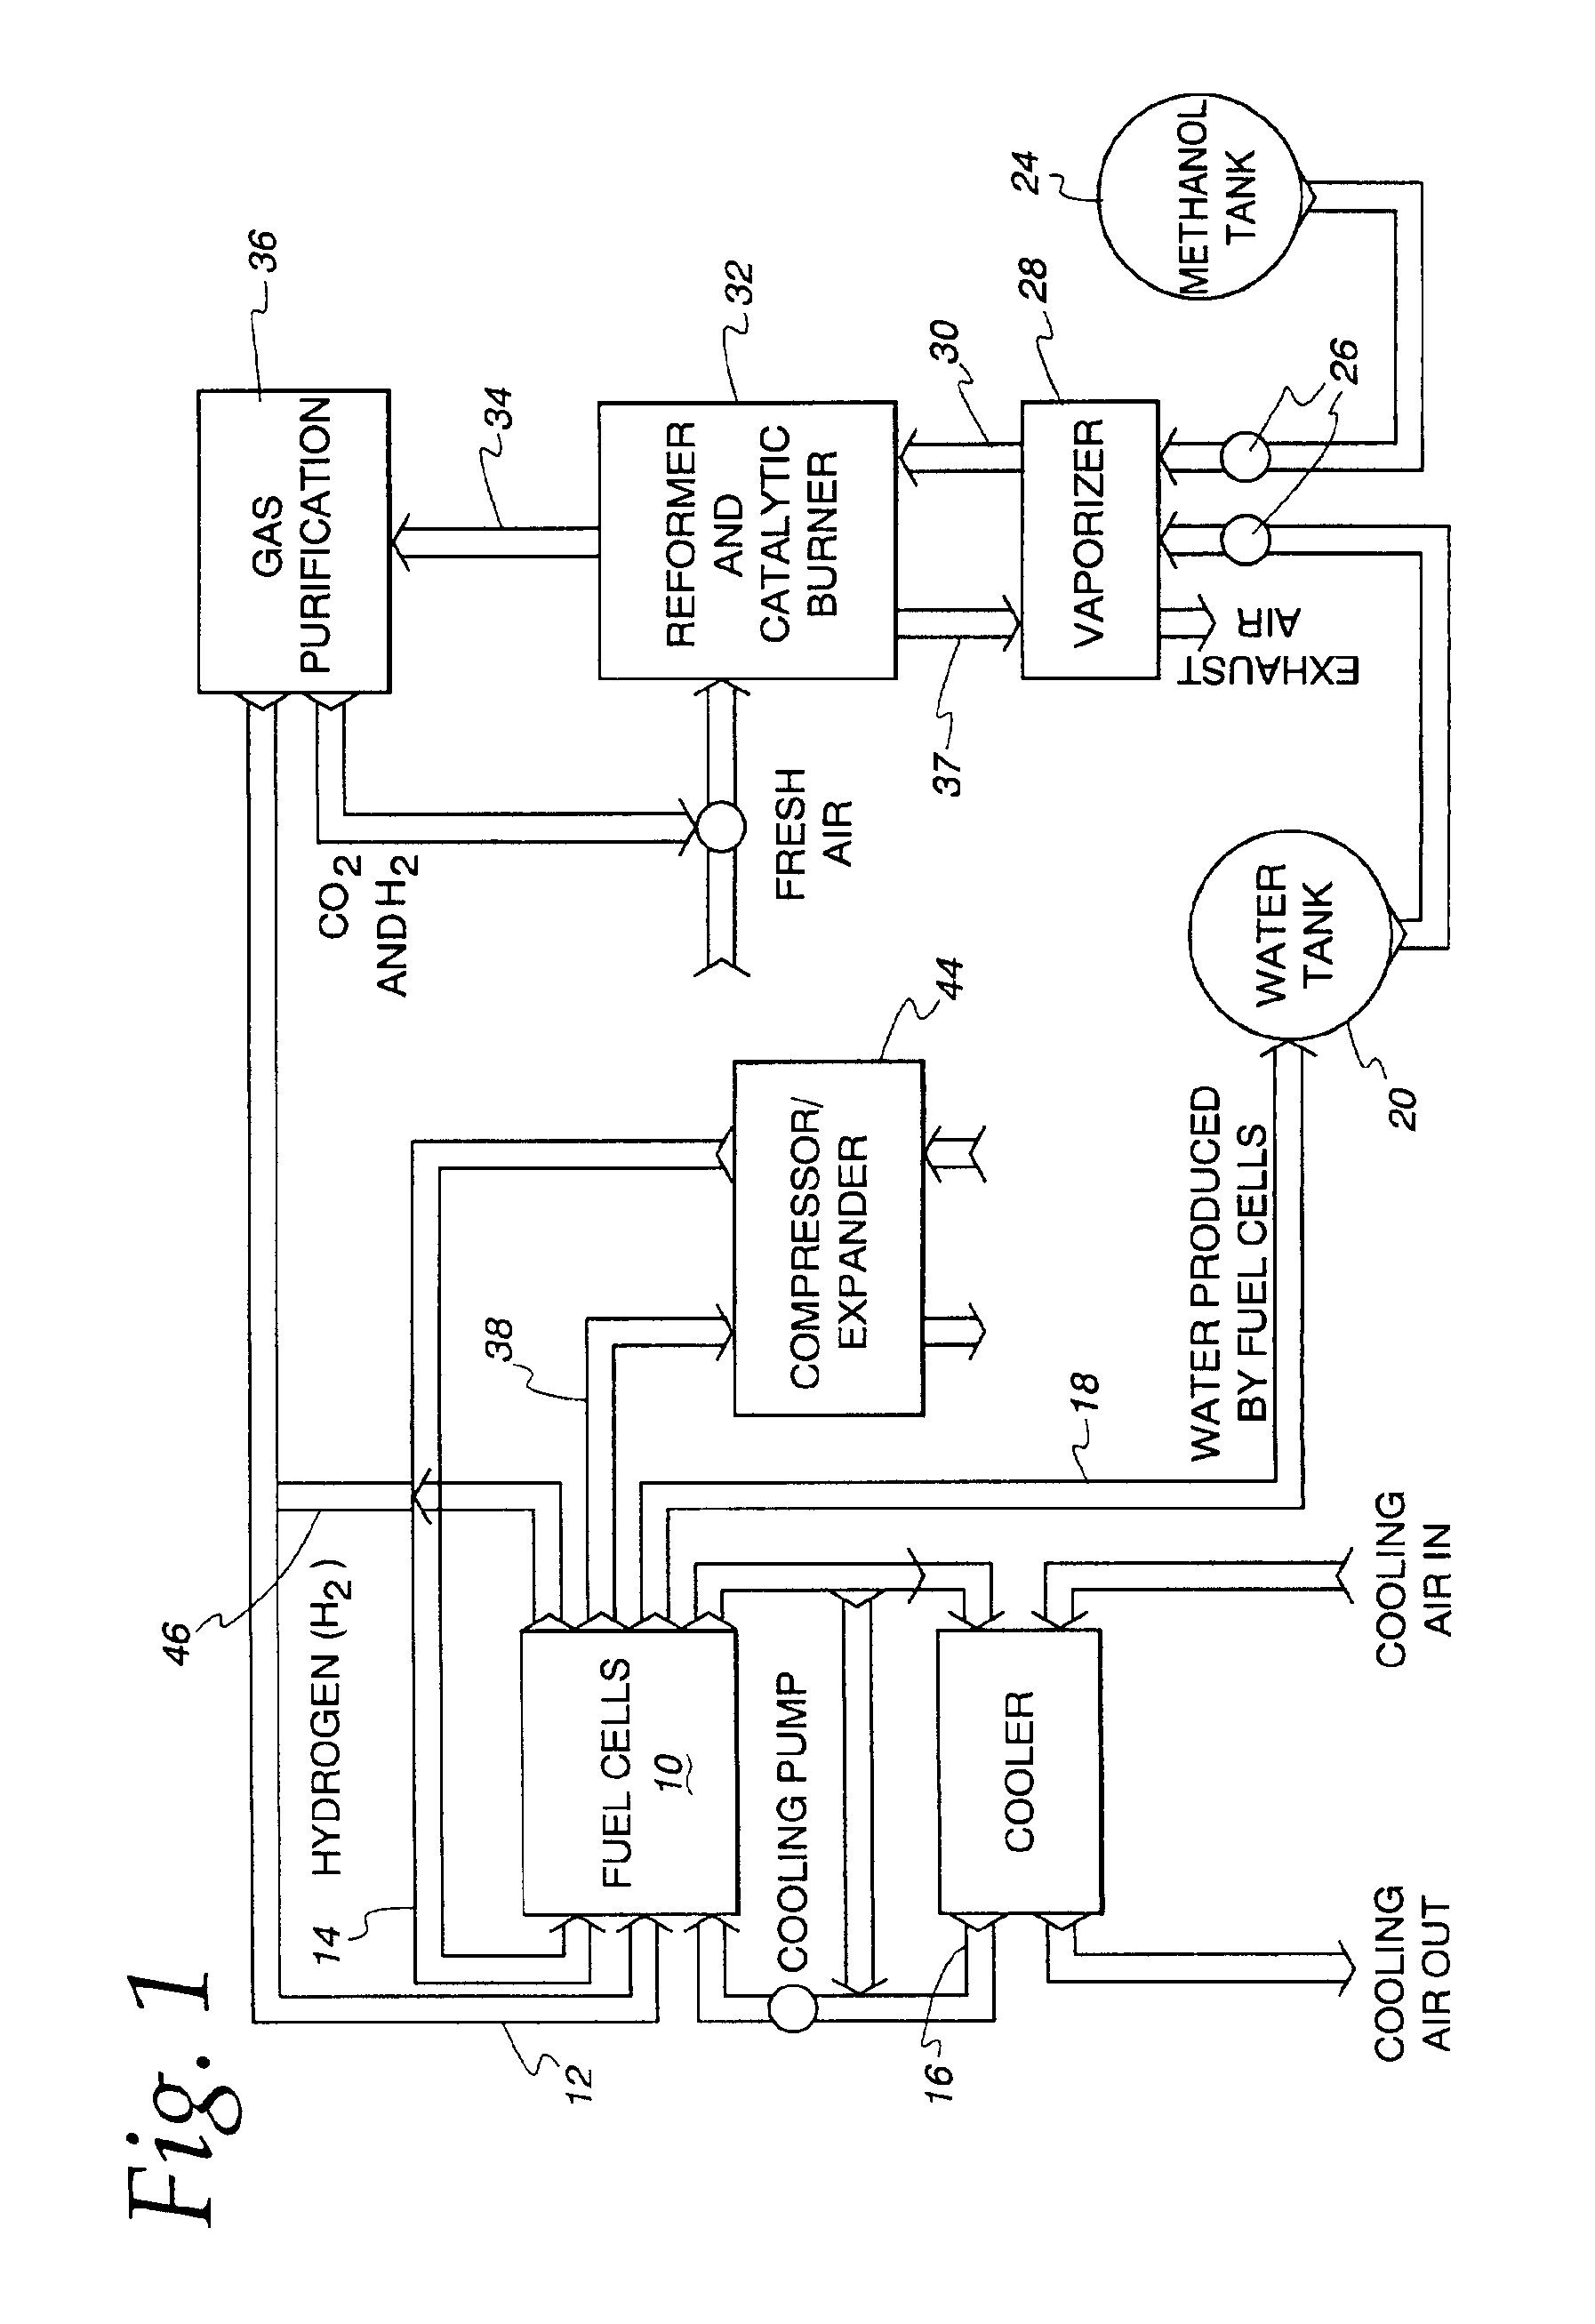 Method and apparatus for vaporizing fuel for a reformer fuel cell system